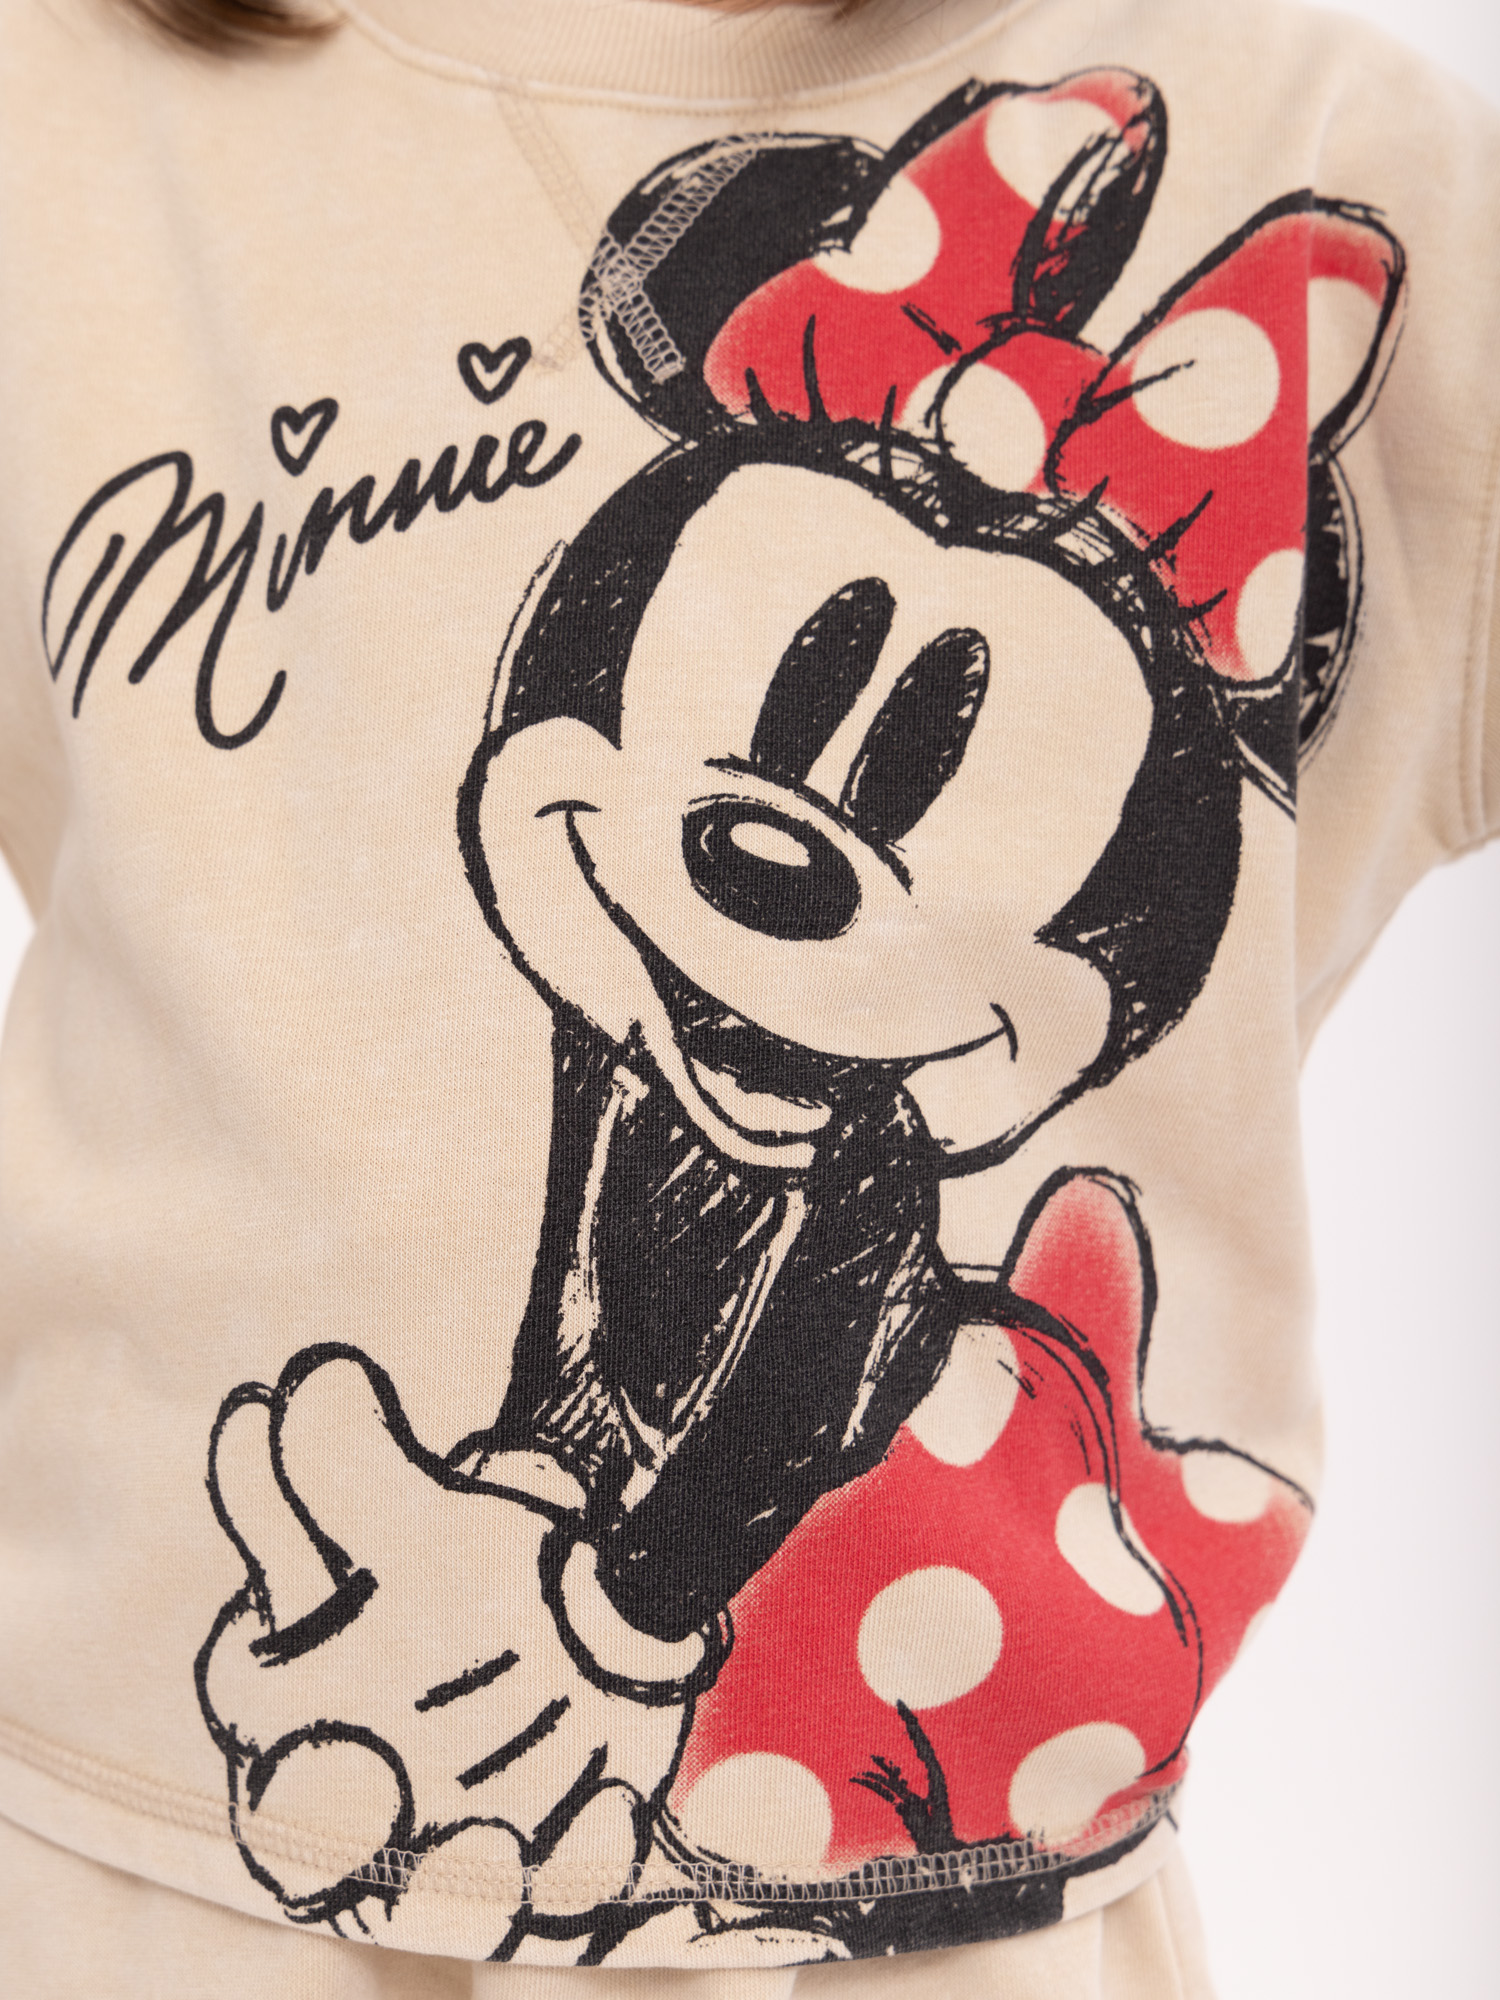 Minnie Mouse Toddler Girls Tee and Shorts Set, 2-Piece, Sizes 12M-5T - image 4 of 11